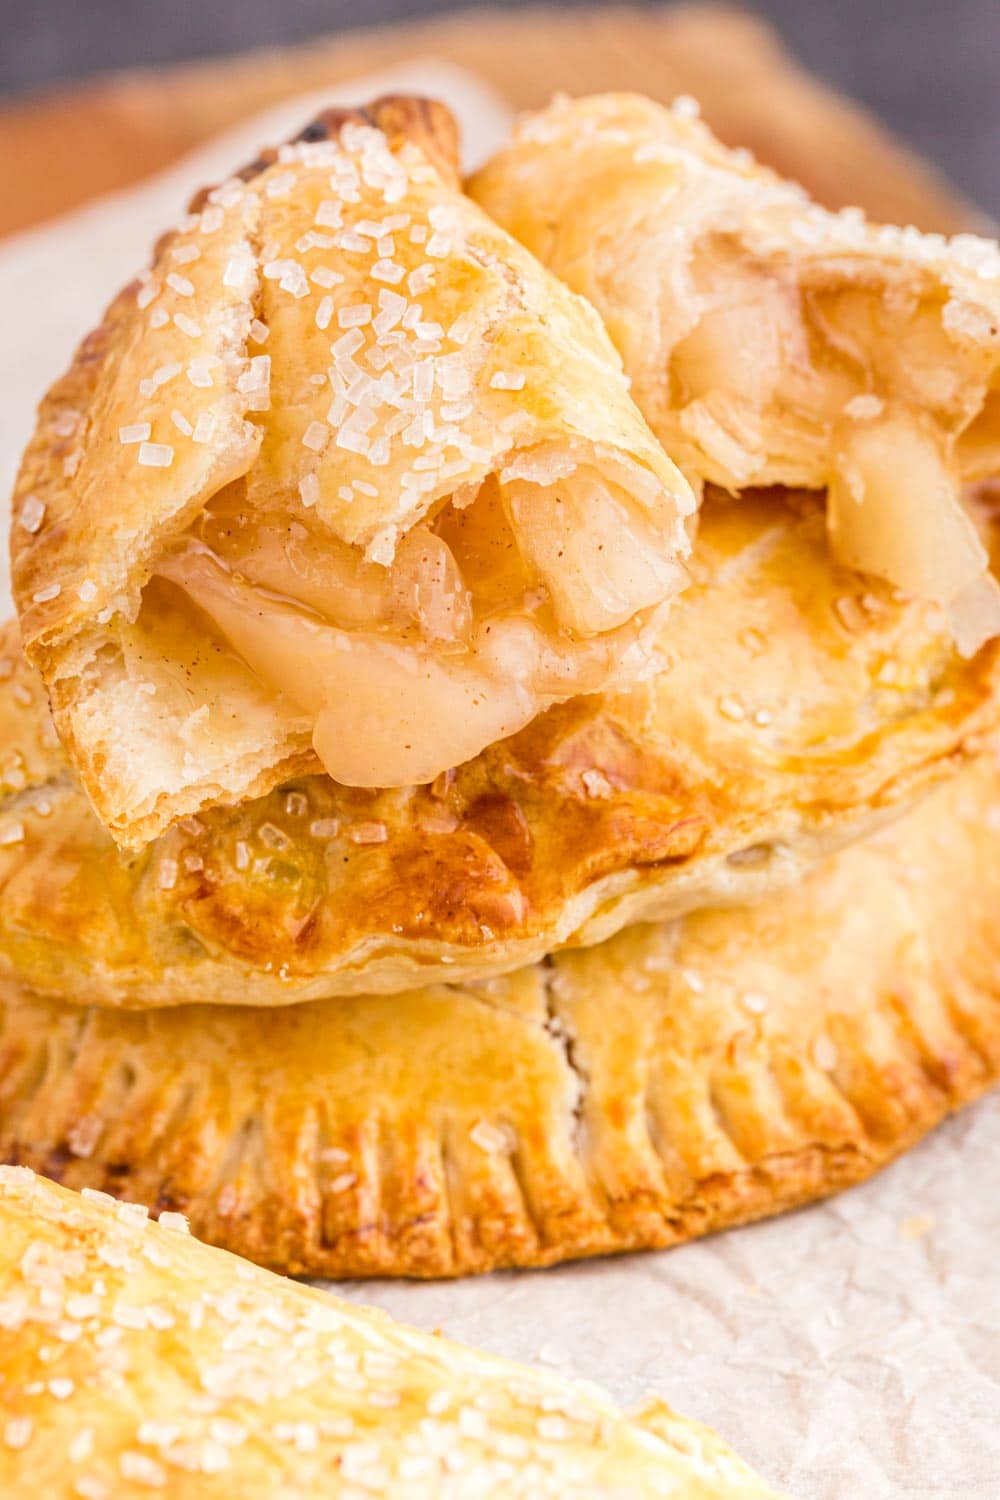 Two stacked apple hand pies, top apple hand pie open with filling exposed.